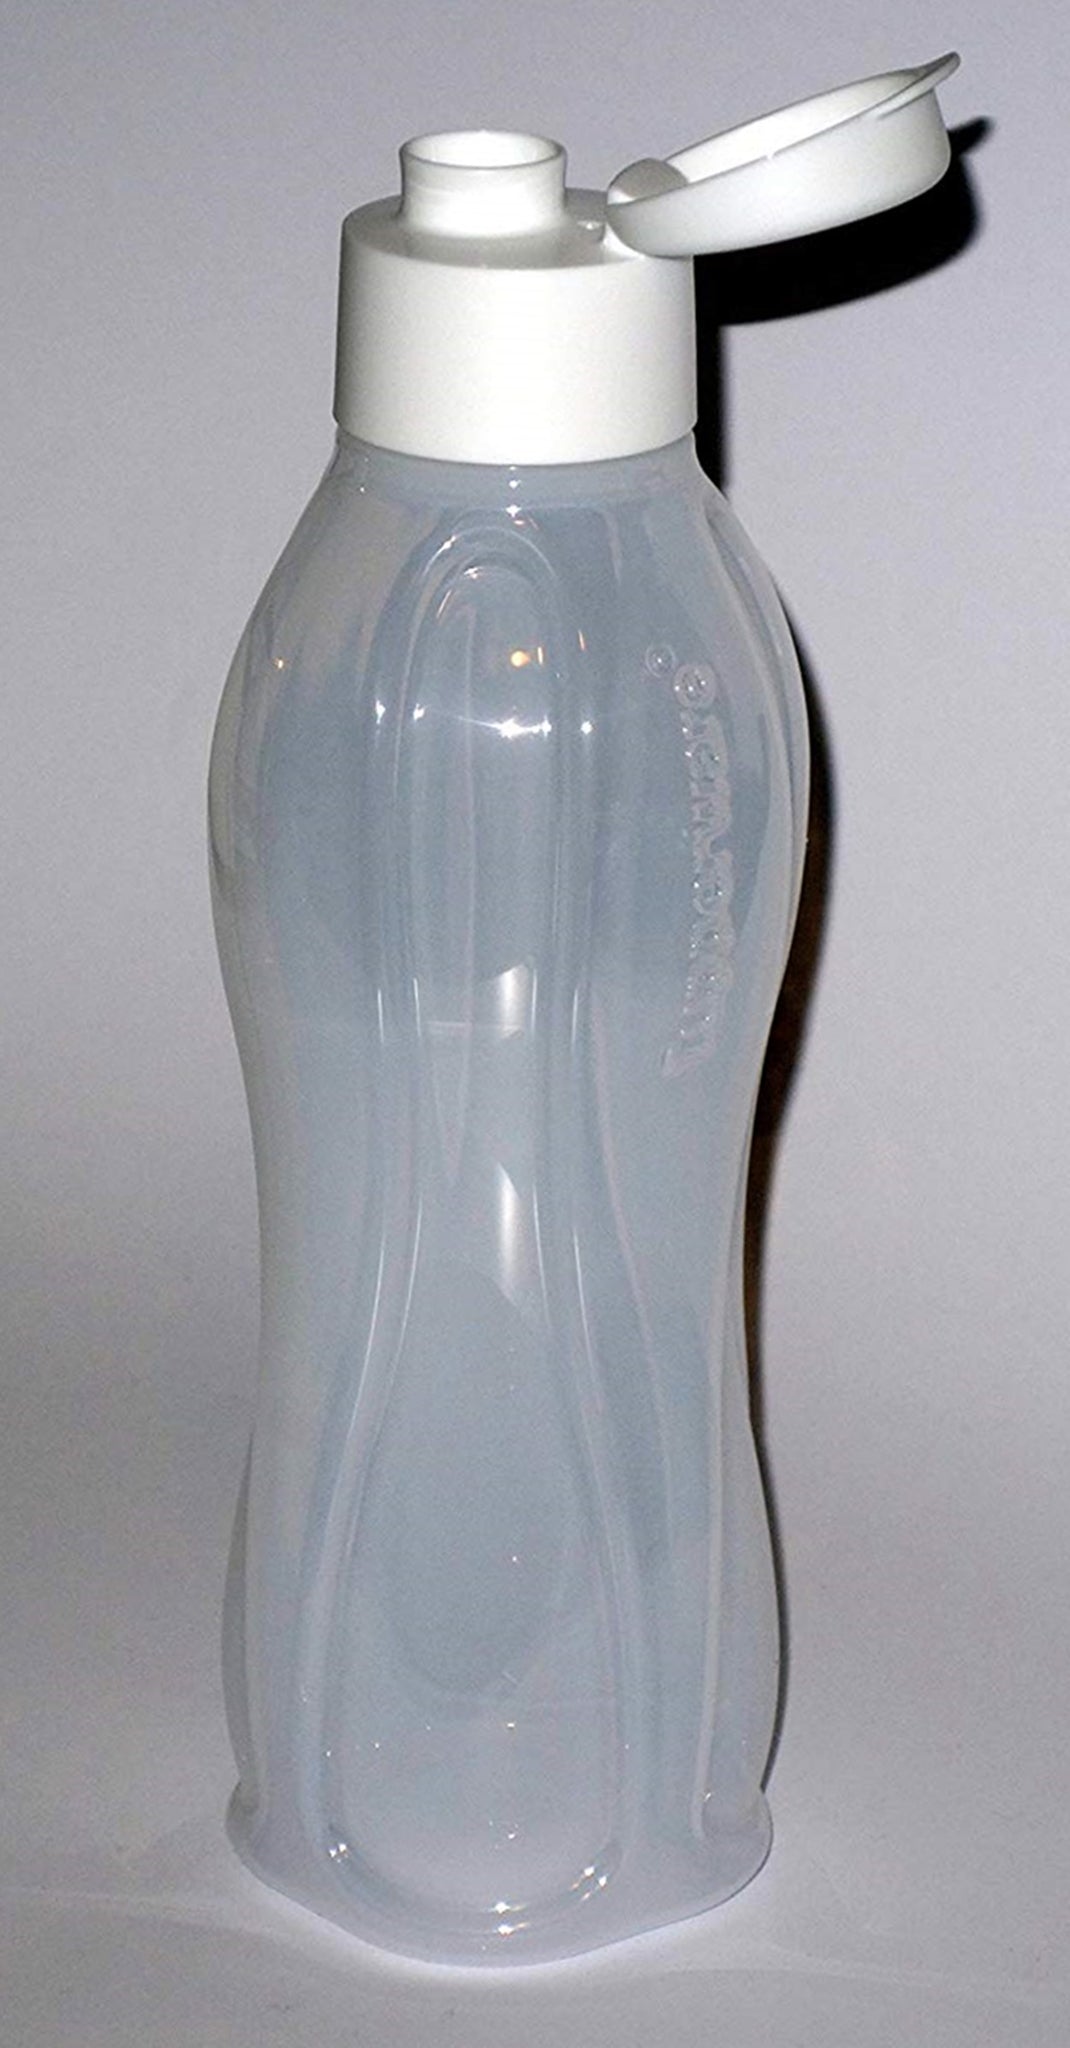 Tupperware No Splash Spout Drink Smoothie Container Clear Blue Lid 22oz  1641-21